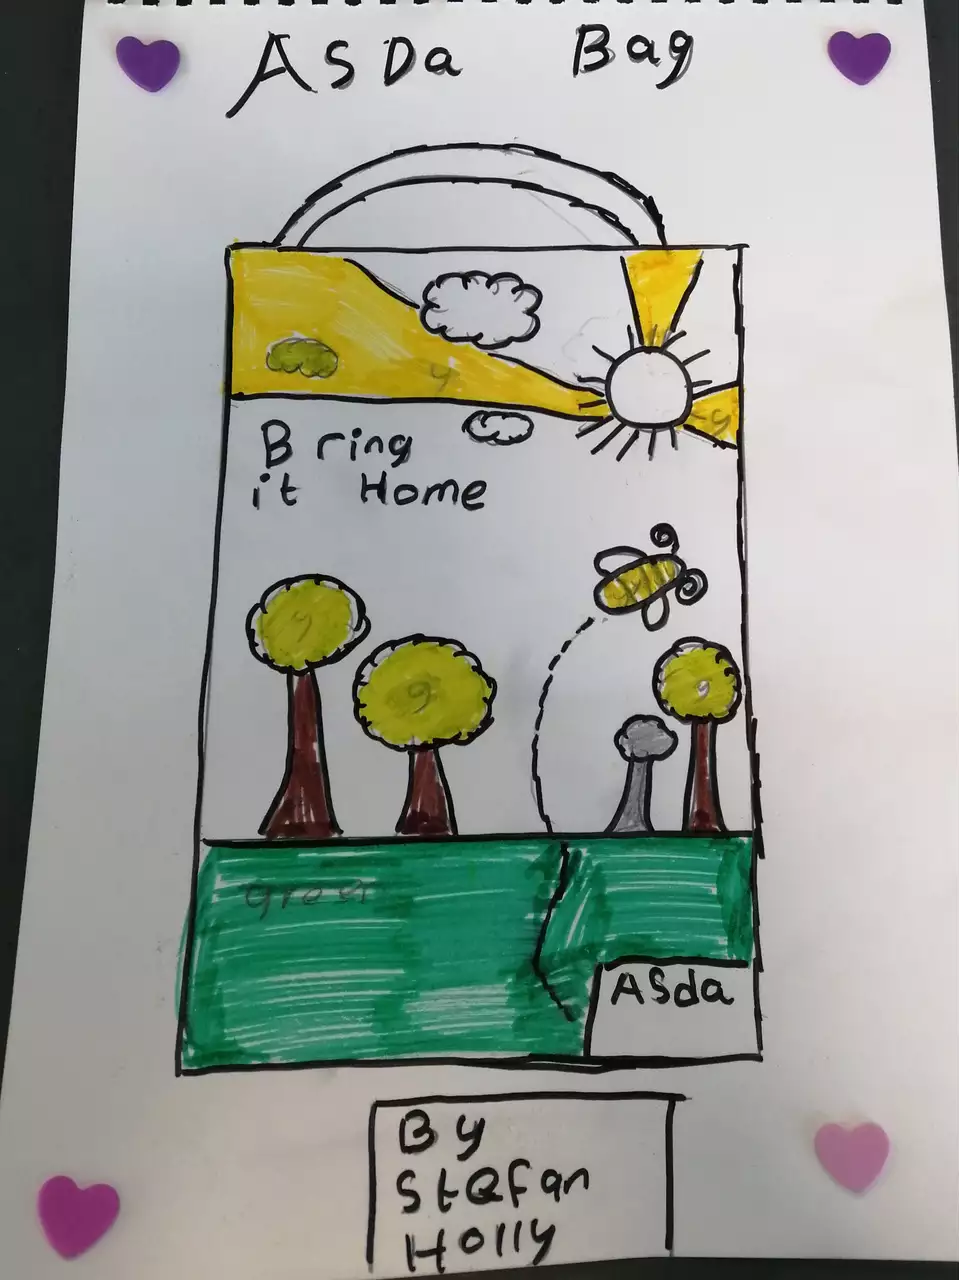 Amazing picture from little Stefan | Asda Clayton Green